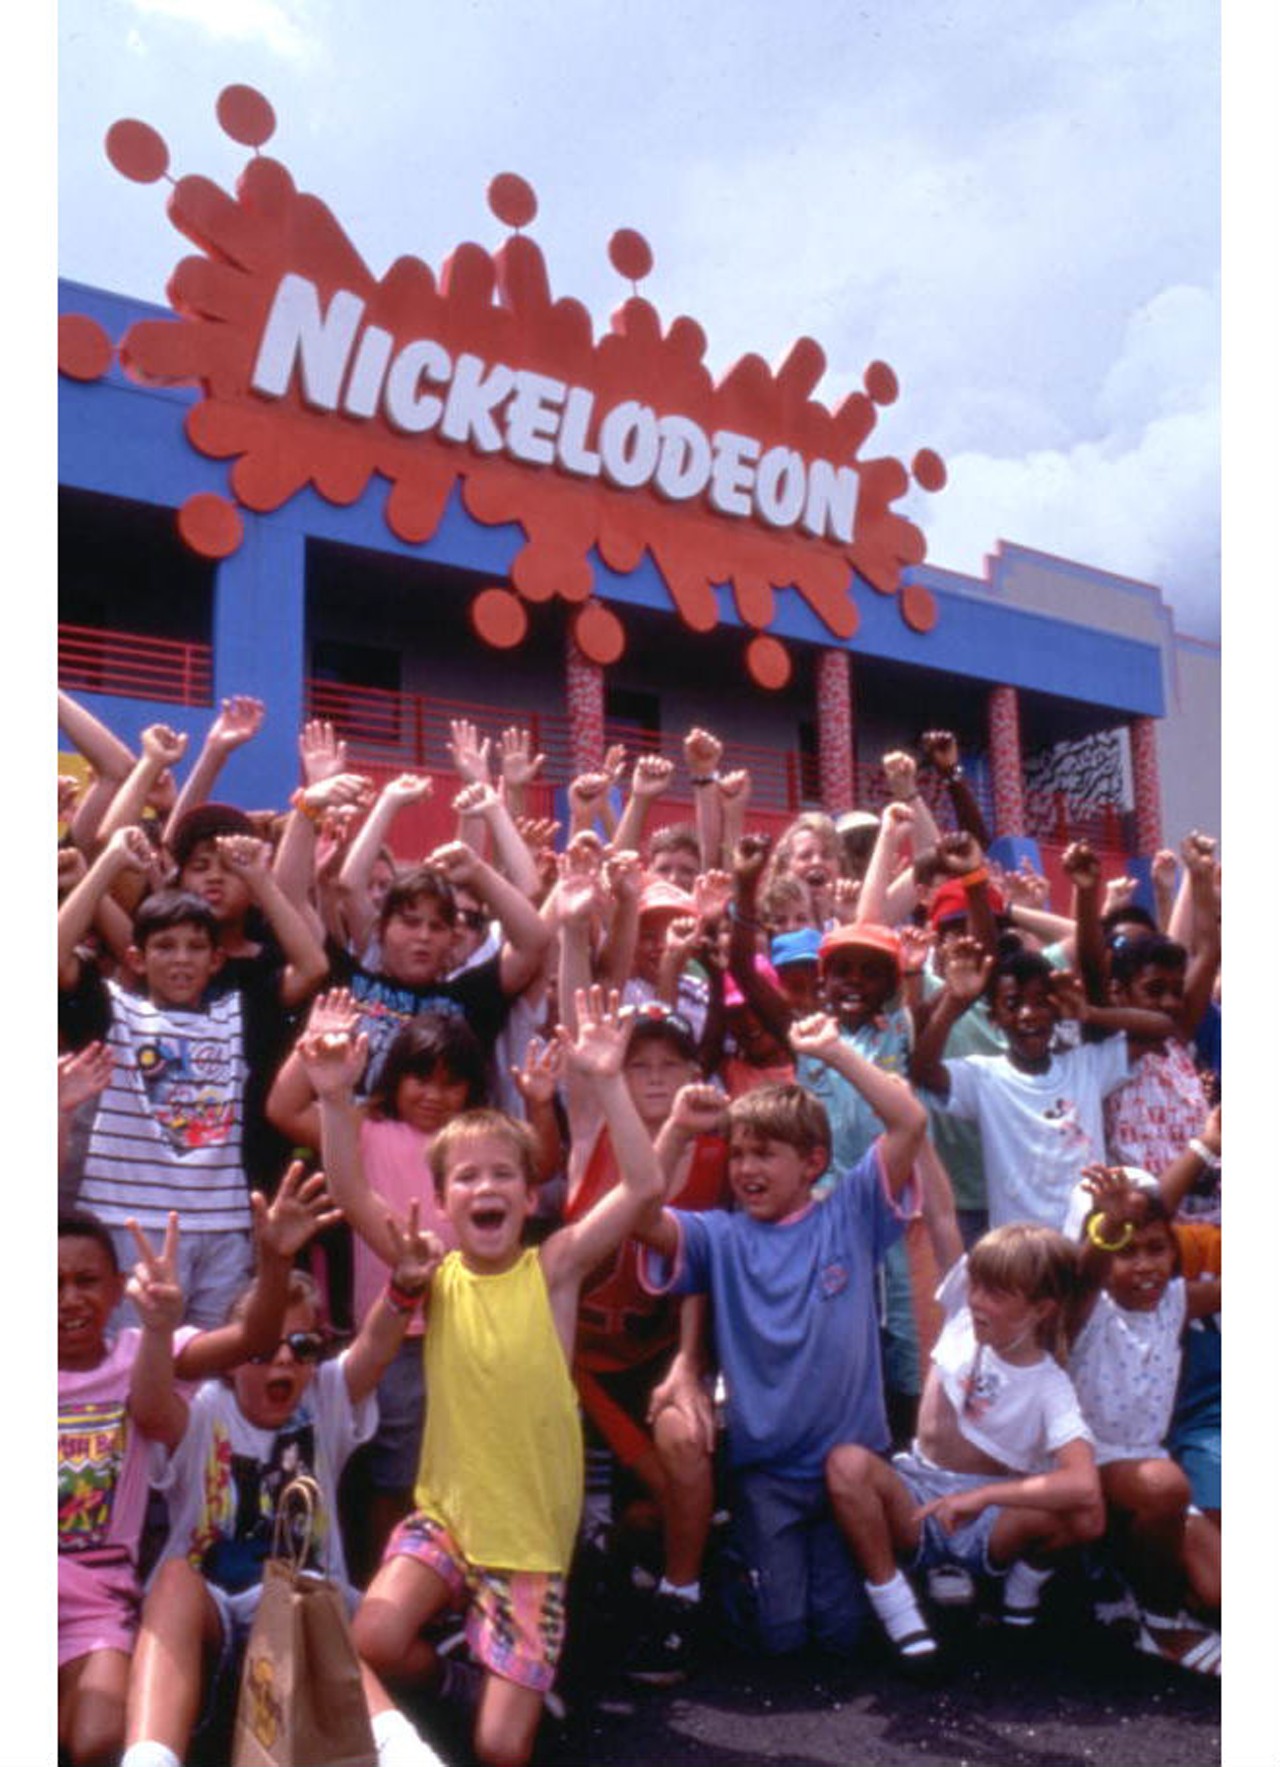 Group portrait of young visitors outside the Nickelodeon Studios attraction.via